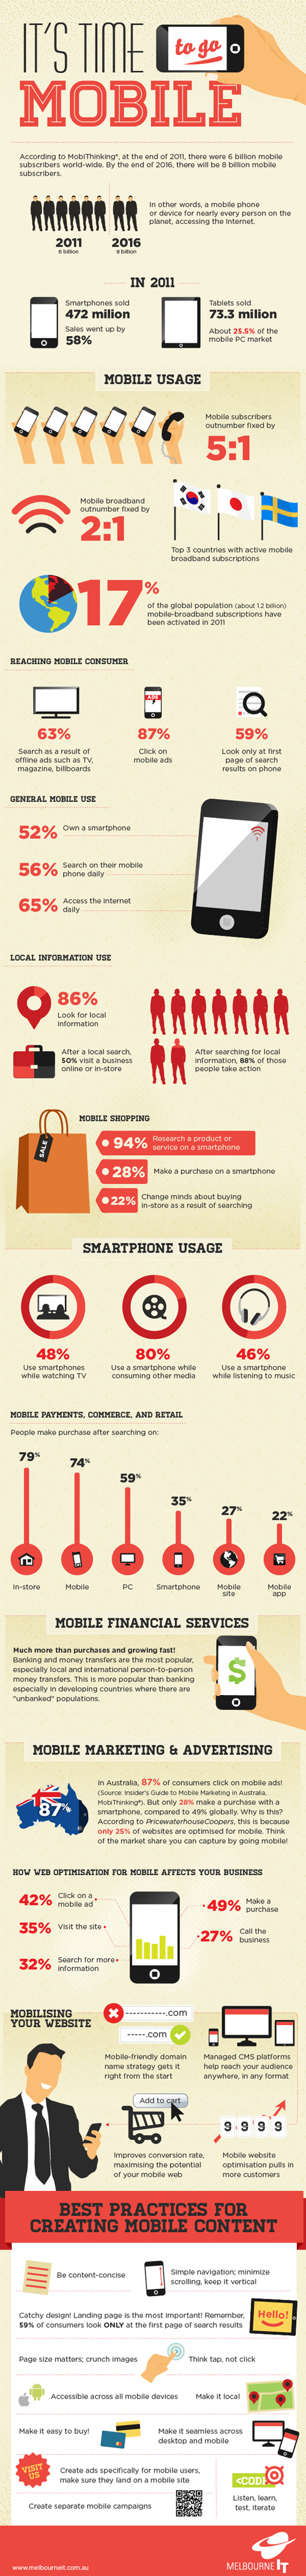 Infographic for It's Time to Go Mobile